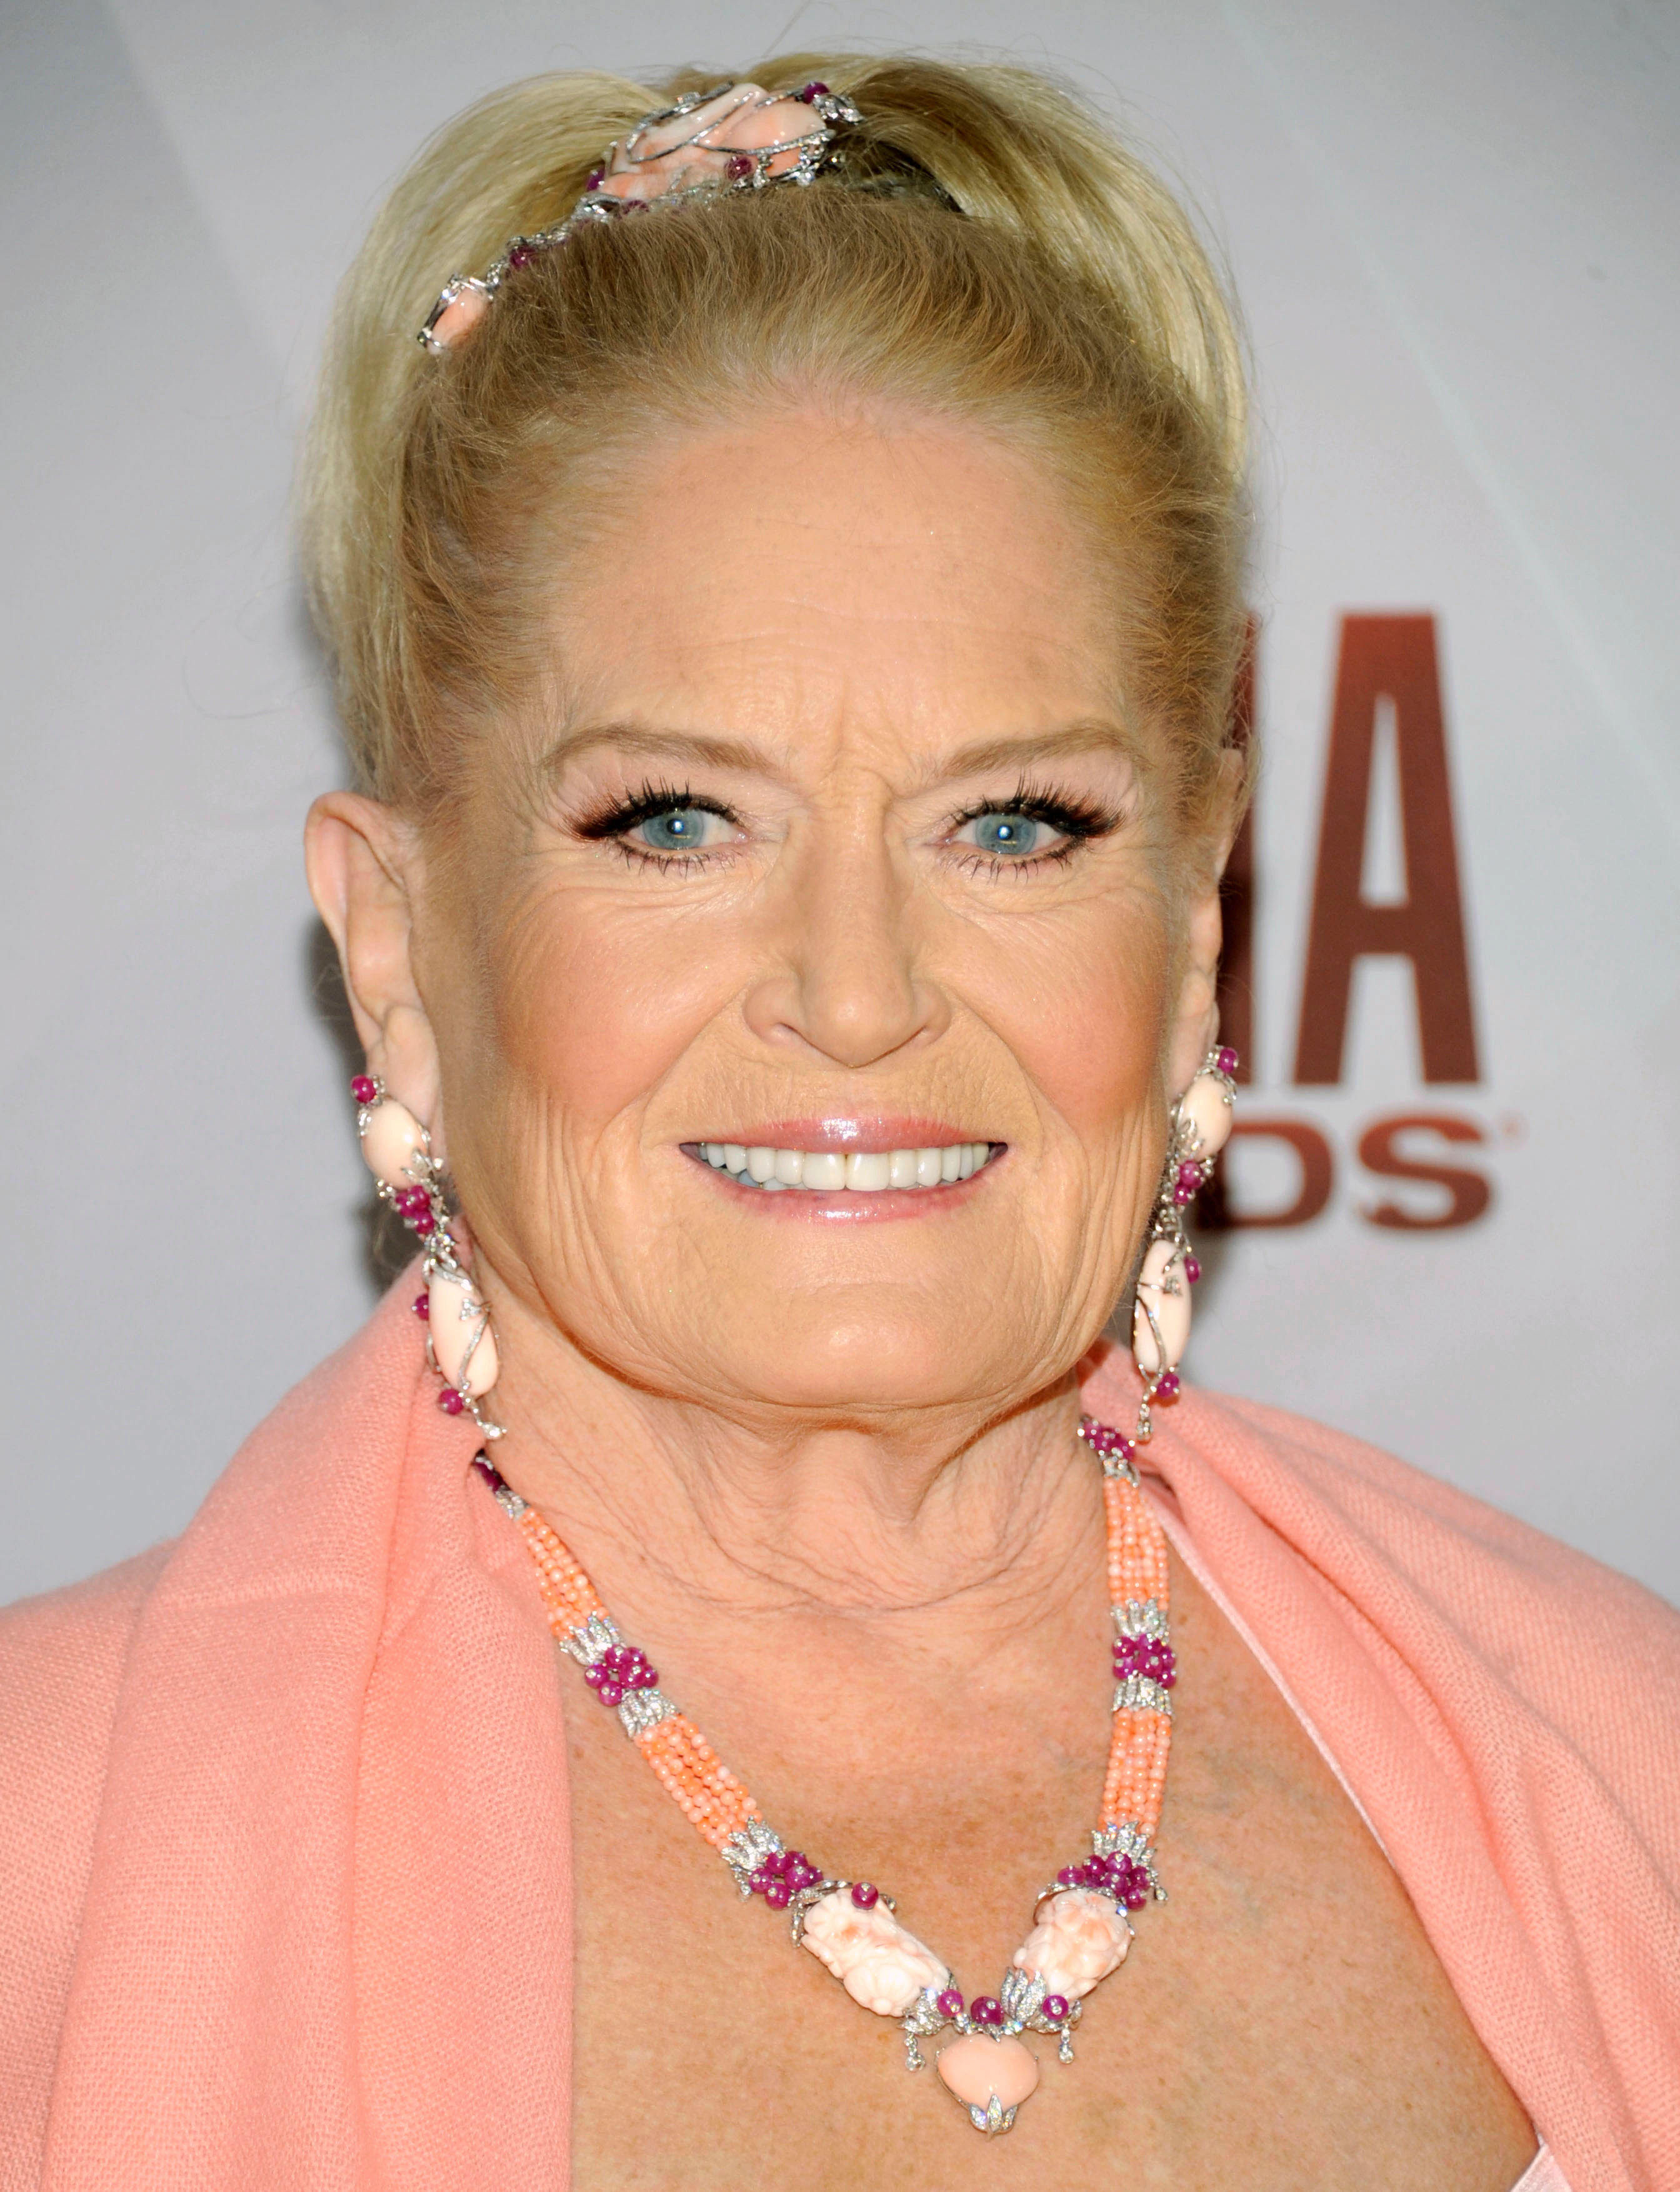 Lynn Anderson Lynn Anderson singer who topped charts in 1971 dies at